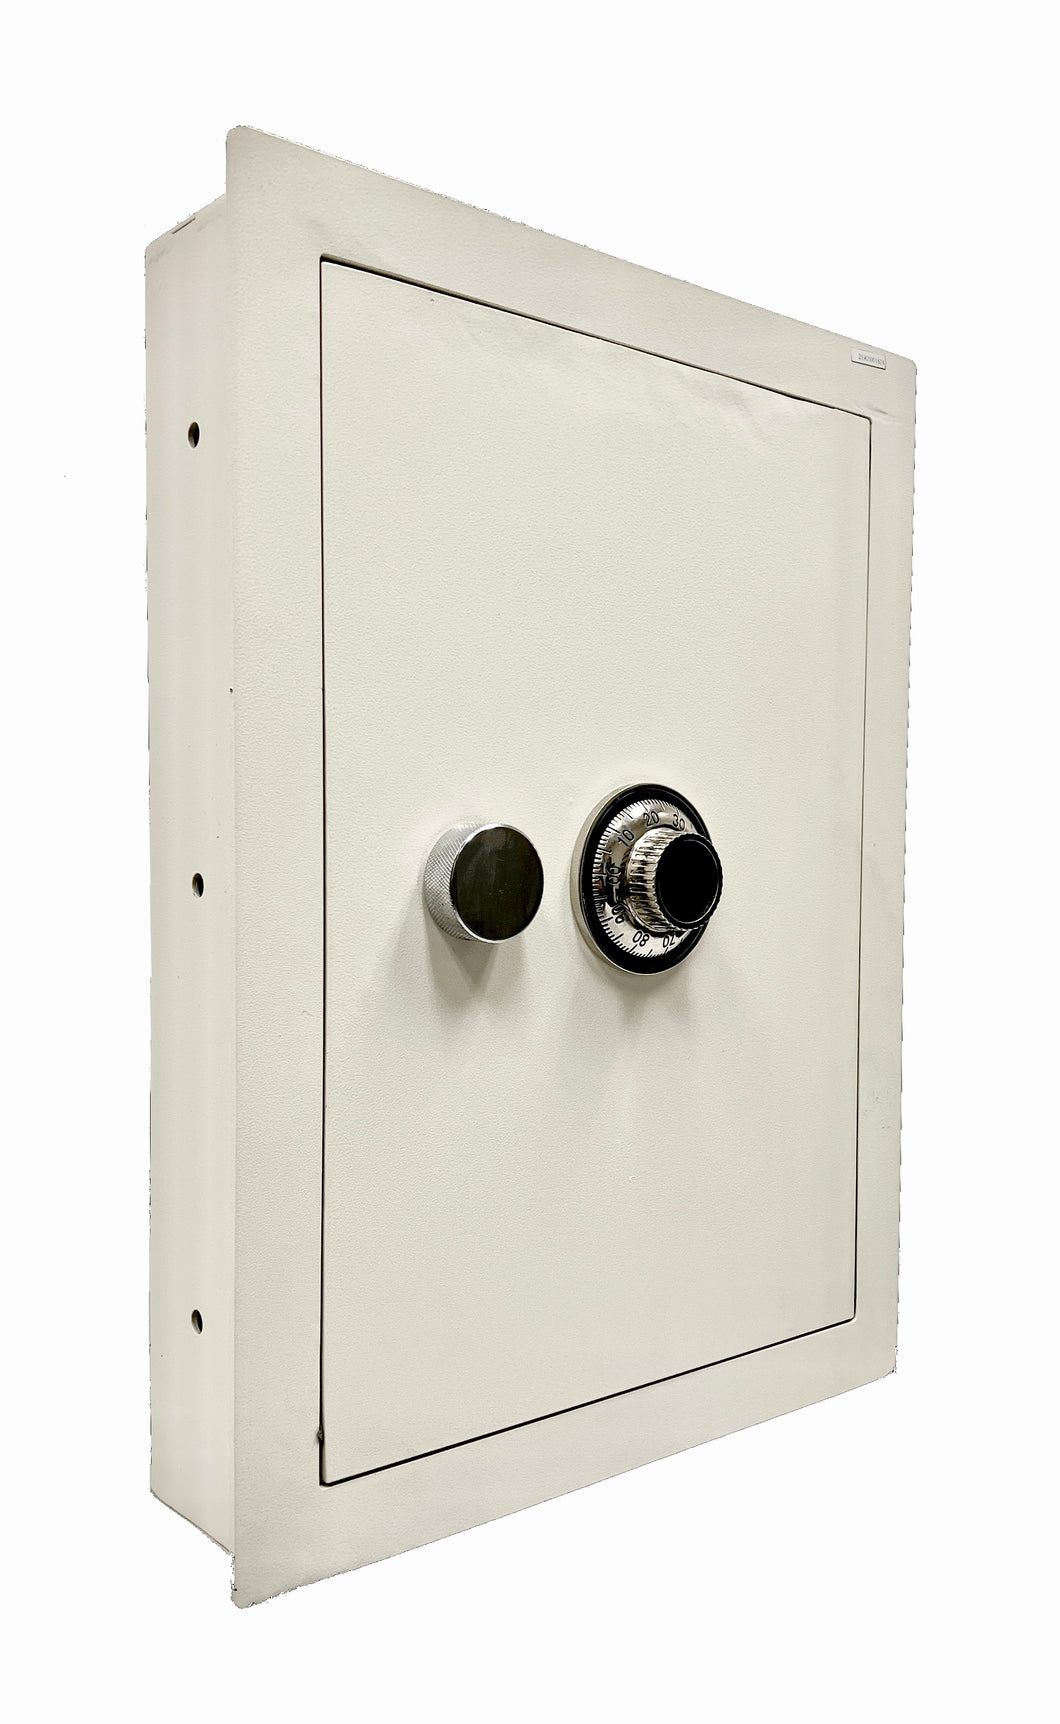 Southeastern Wall Safe, Heavy Duty Mechanical Dial Hidden Safe with Removable Shelf, Home Safe for Firearms, Money, Jewelry, Passport